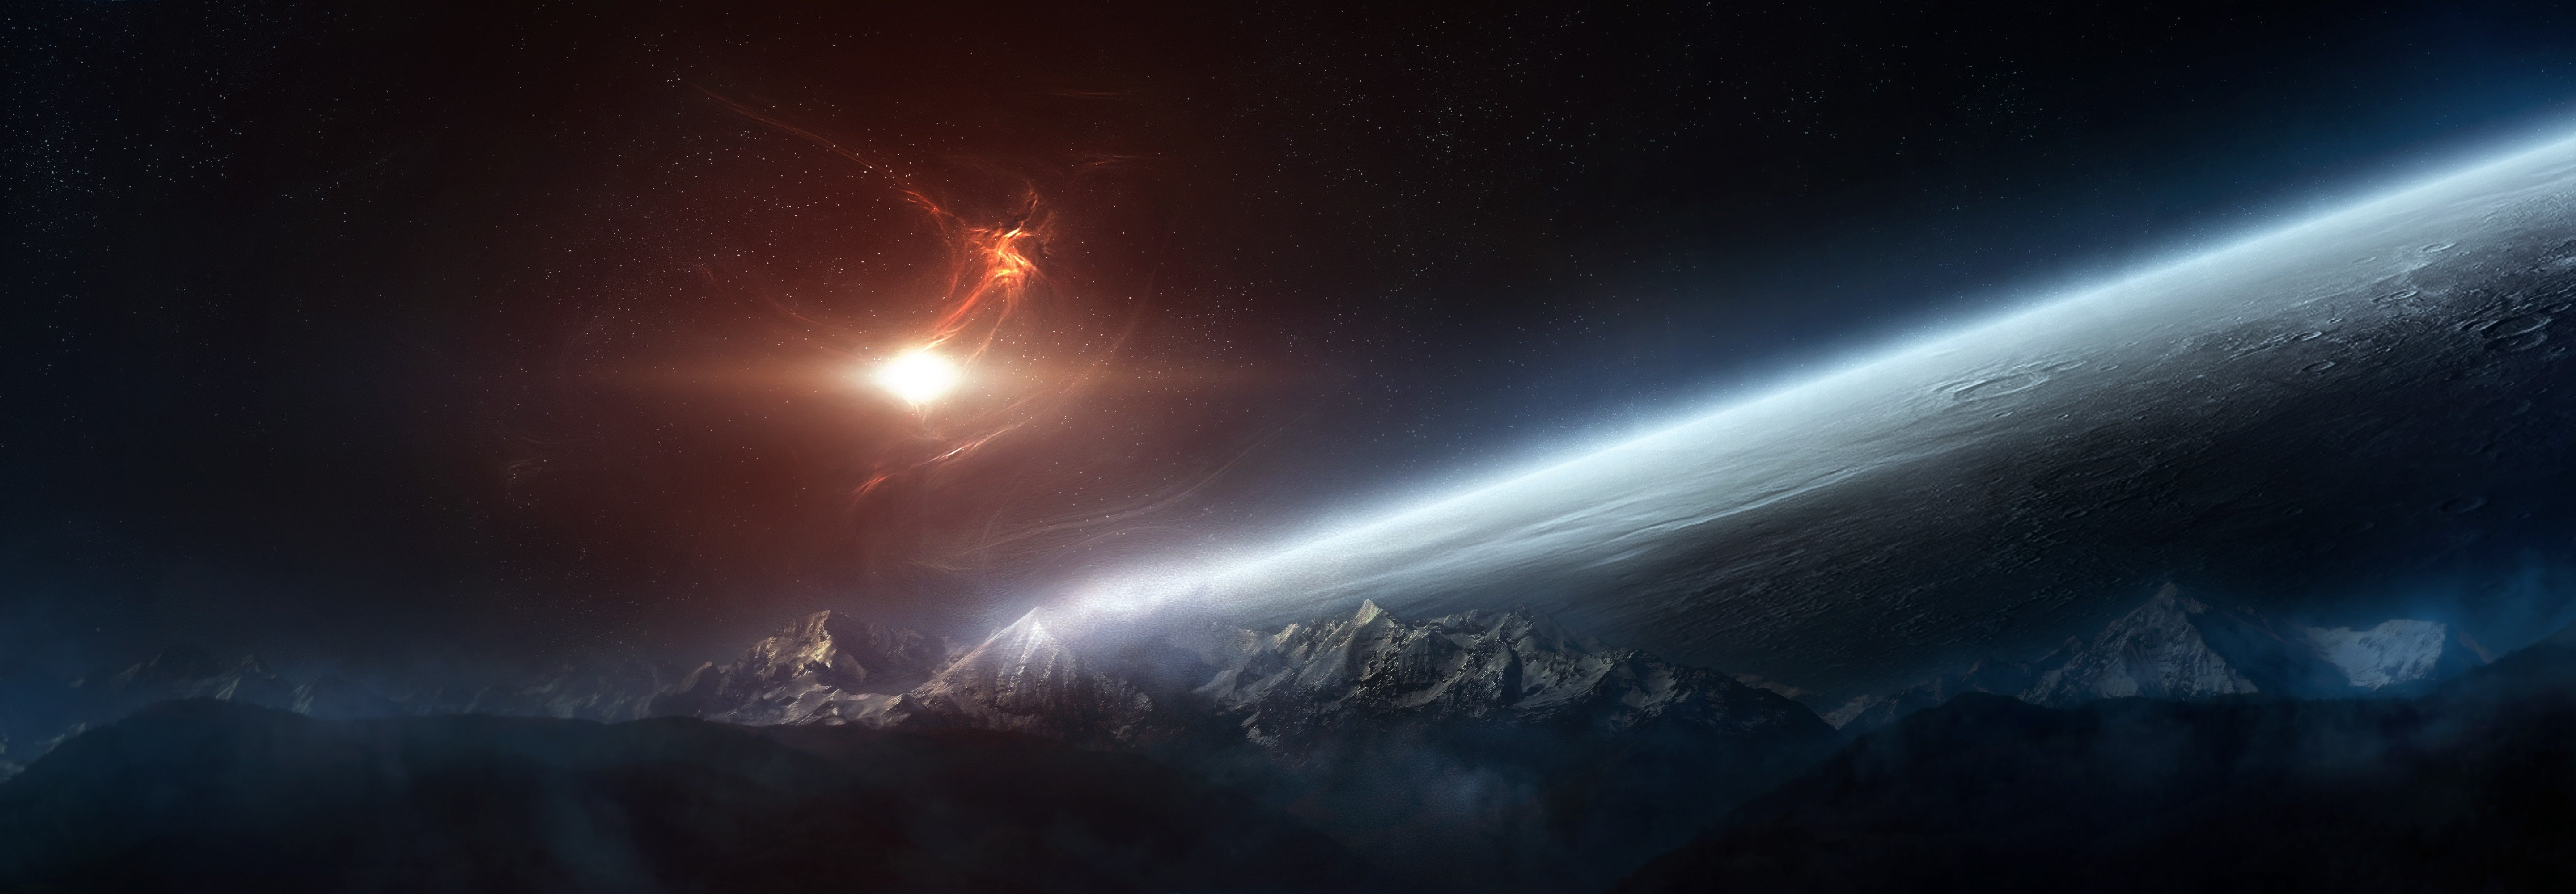 Tri screen space wallpaper with mountains and lovely nebula http